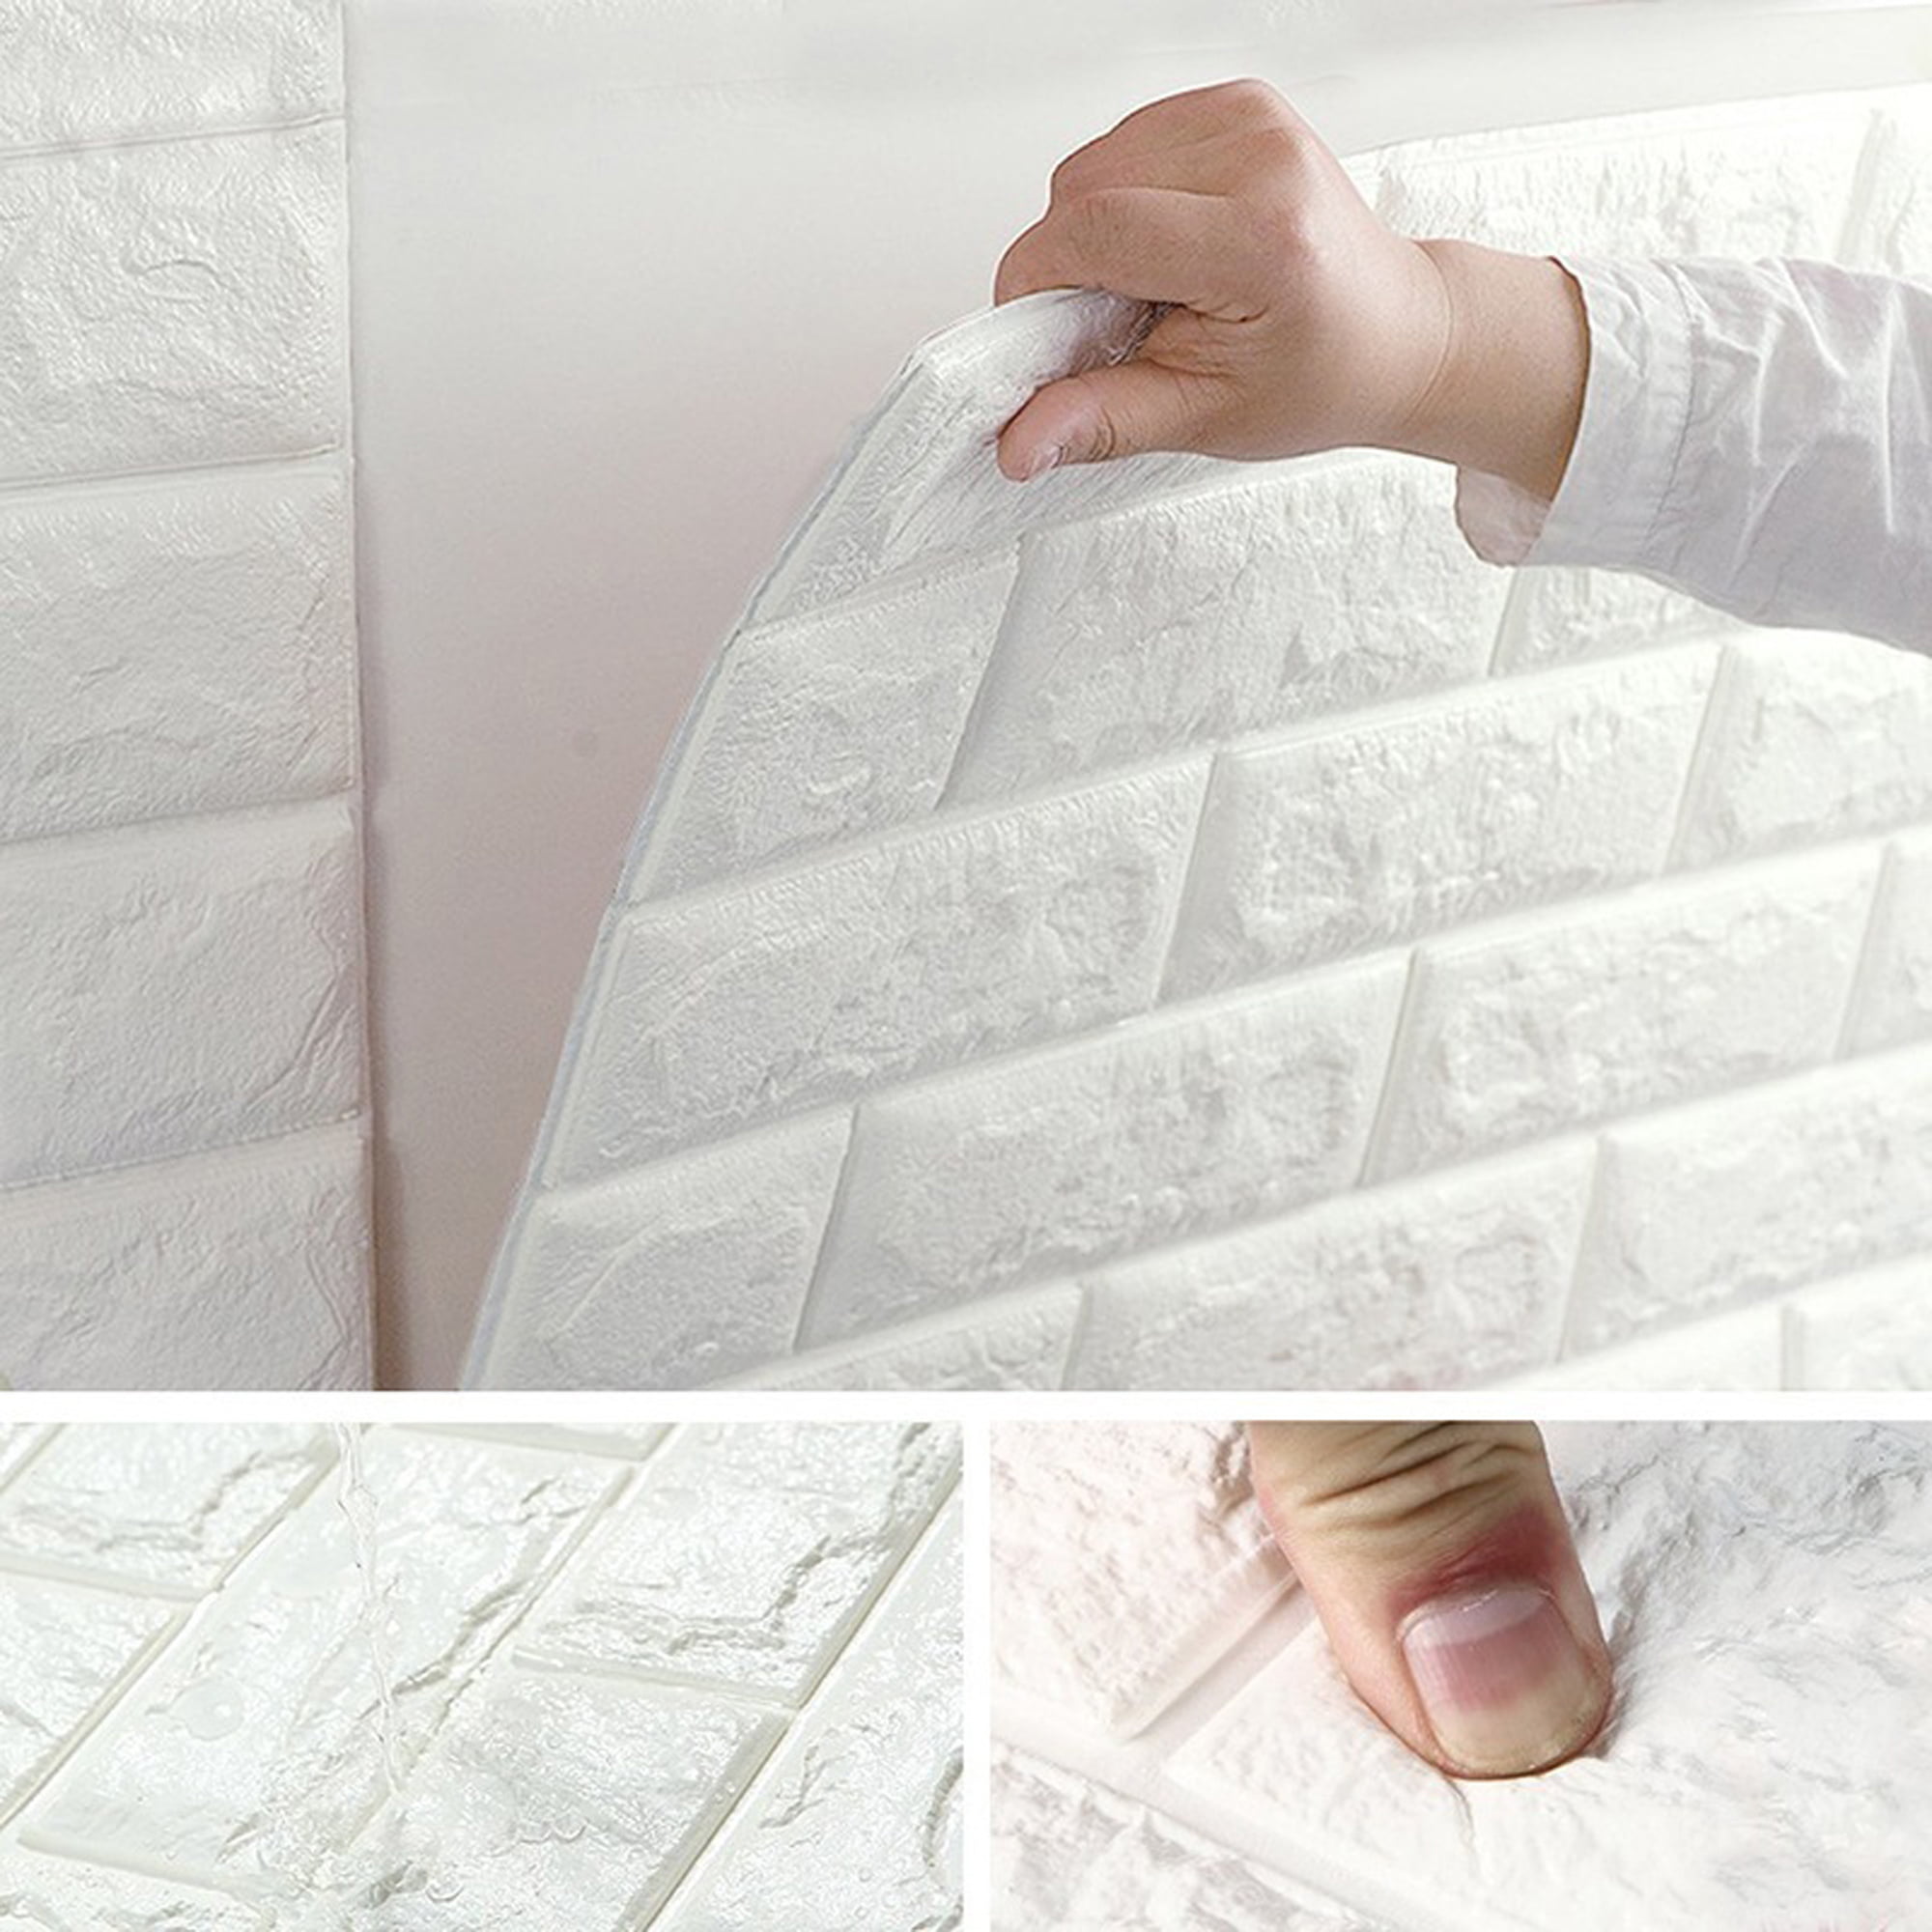 Arthome White Brick 3D Wall Panels Peel and Stick Wallpaper for Living Room Wall 